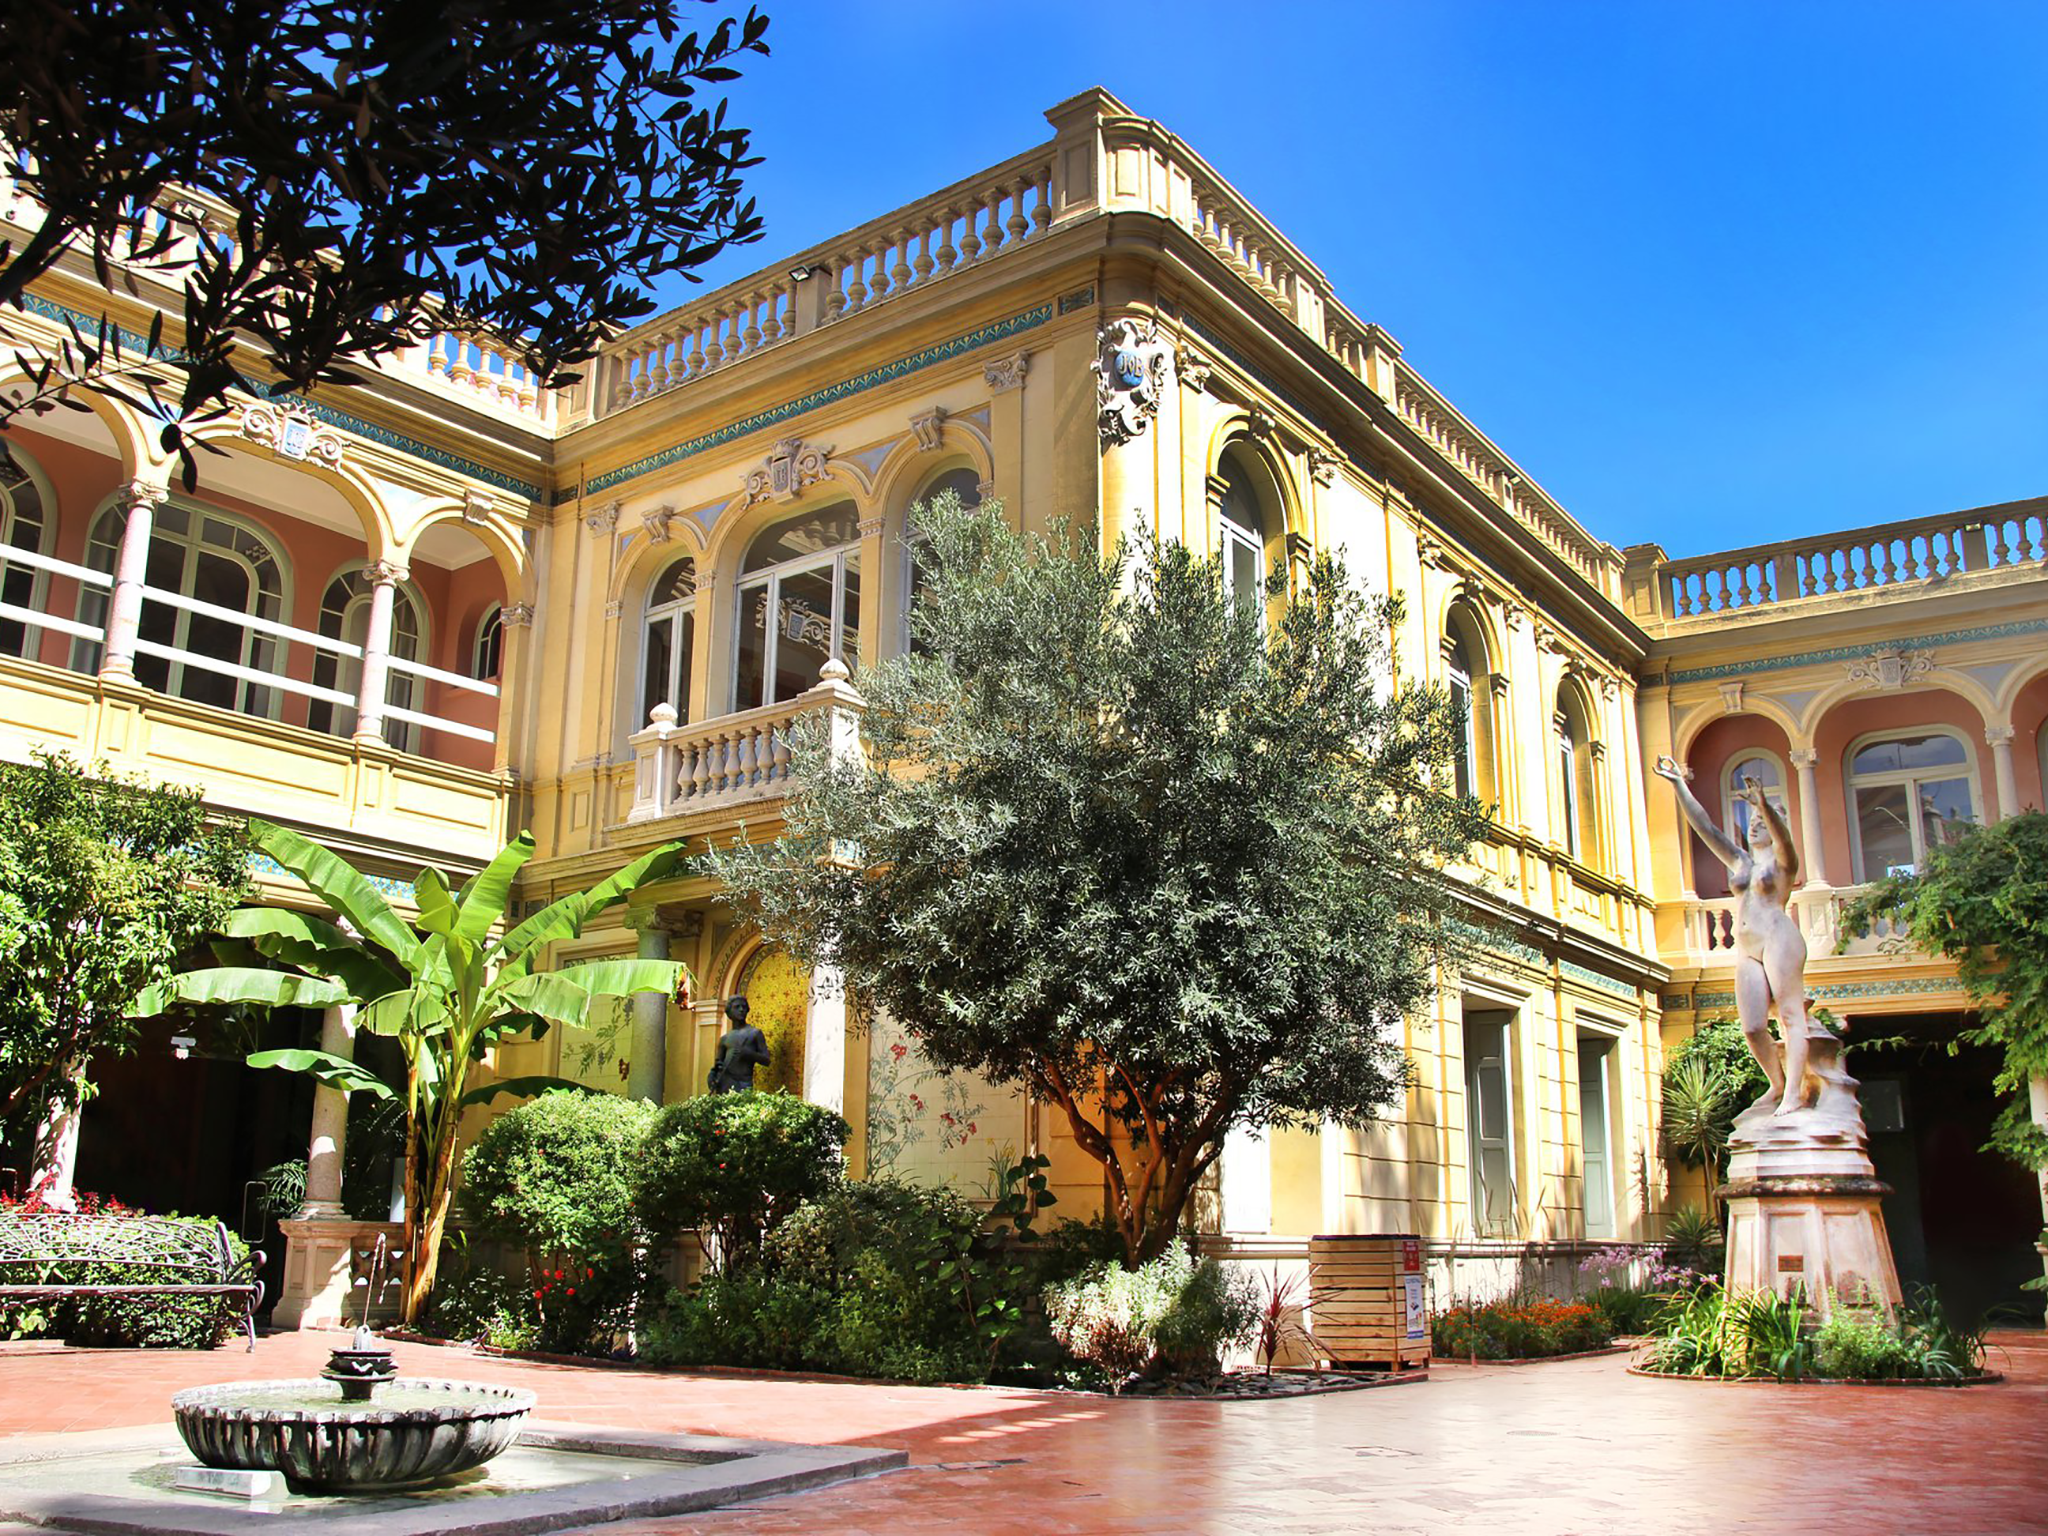 The Art Deco mansion that is L’Hôtel Pams is one of the city’s main attractions